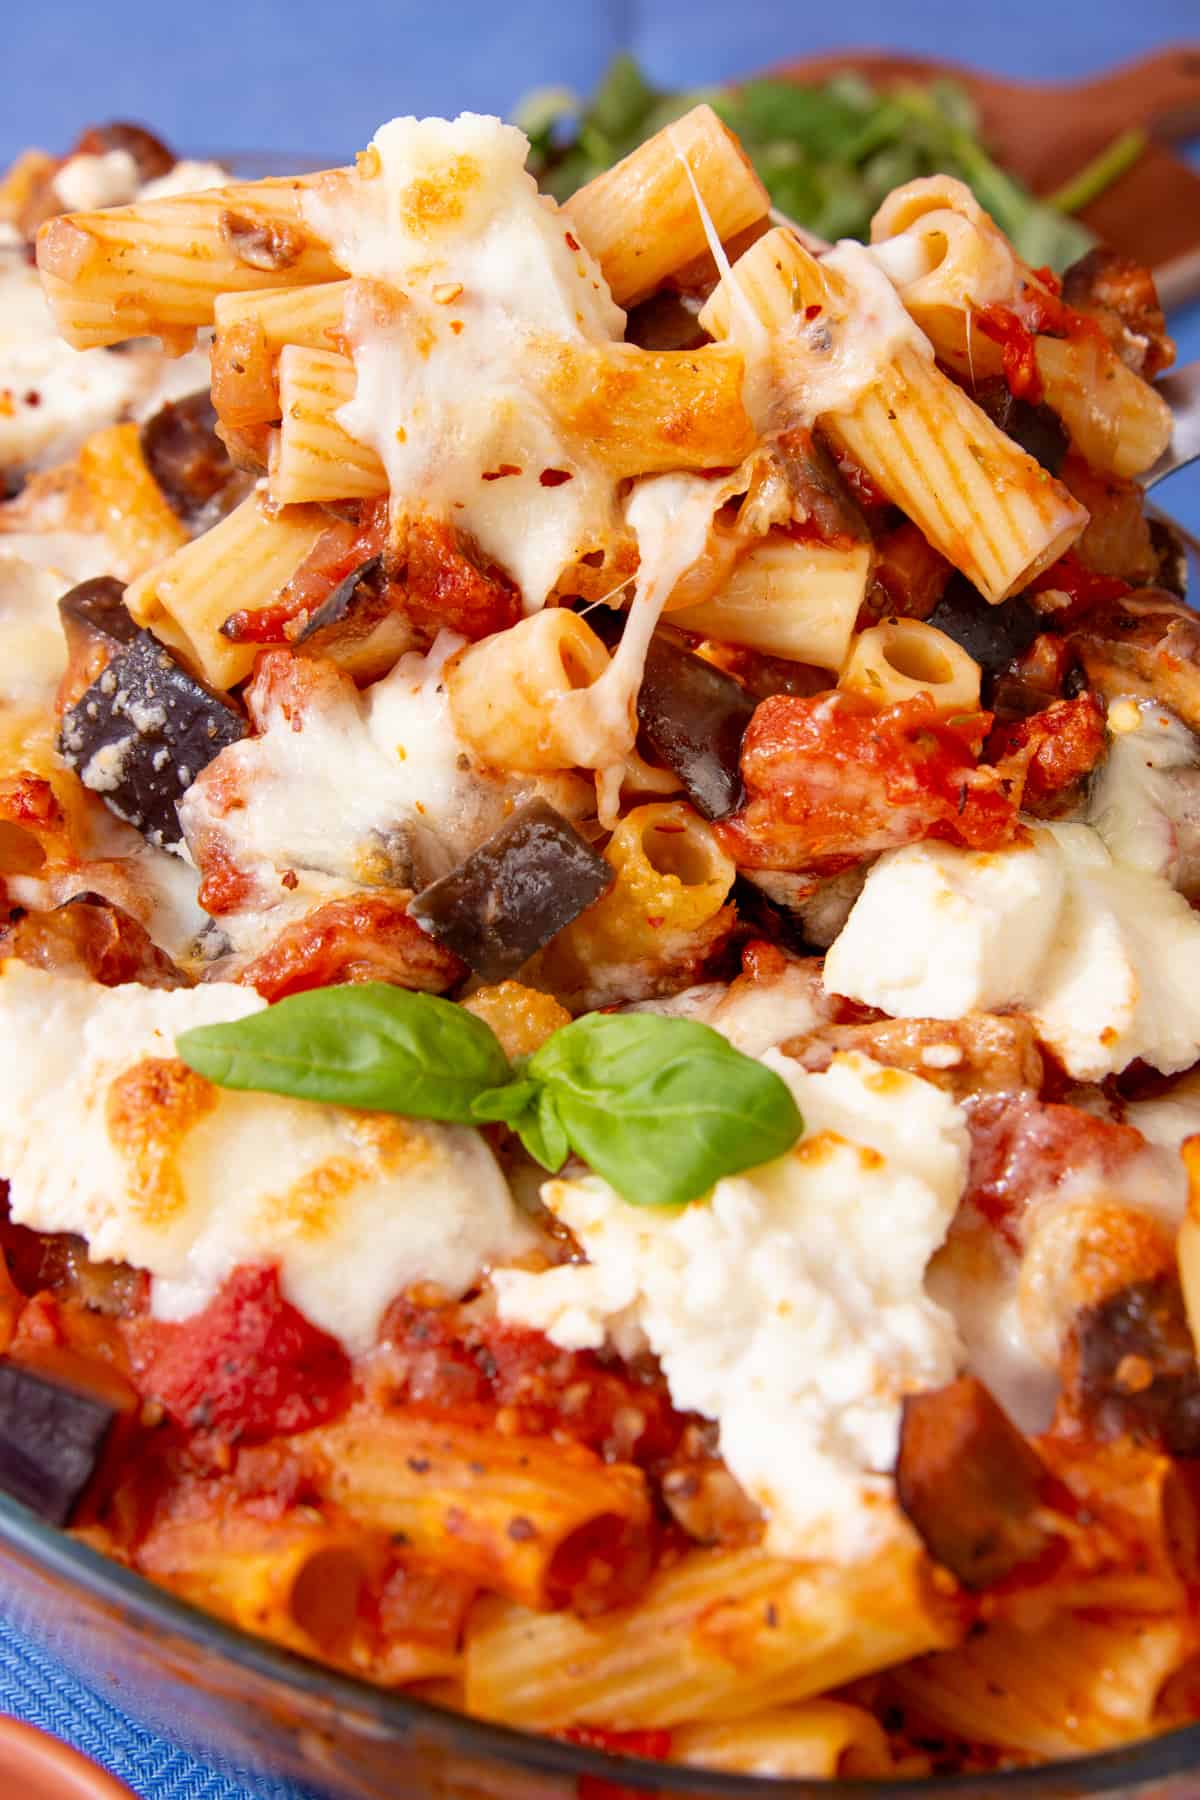 A close up of bowl of rigatoni pasta with a cheesy tomatey sauce with roasted vegetables and mozzarella cheese in a bowl with a wooden spoon in faint view.